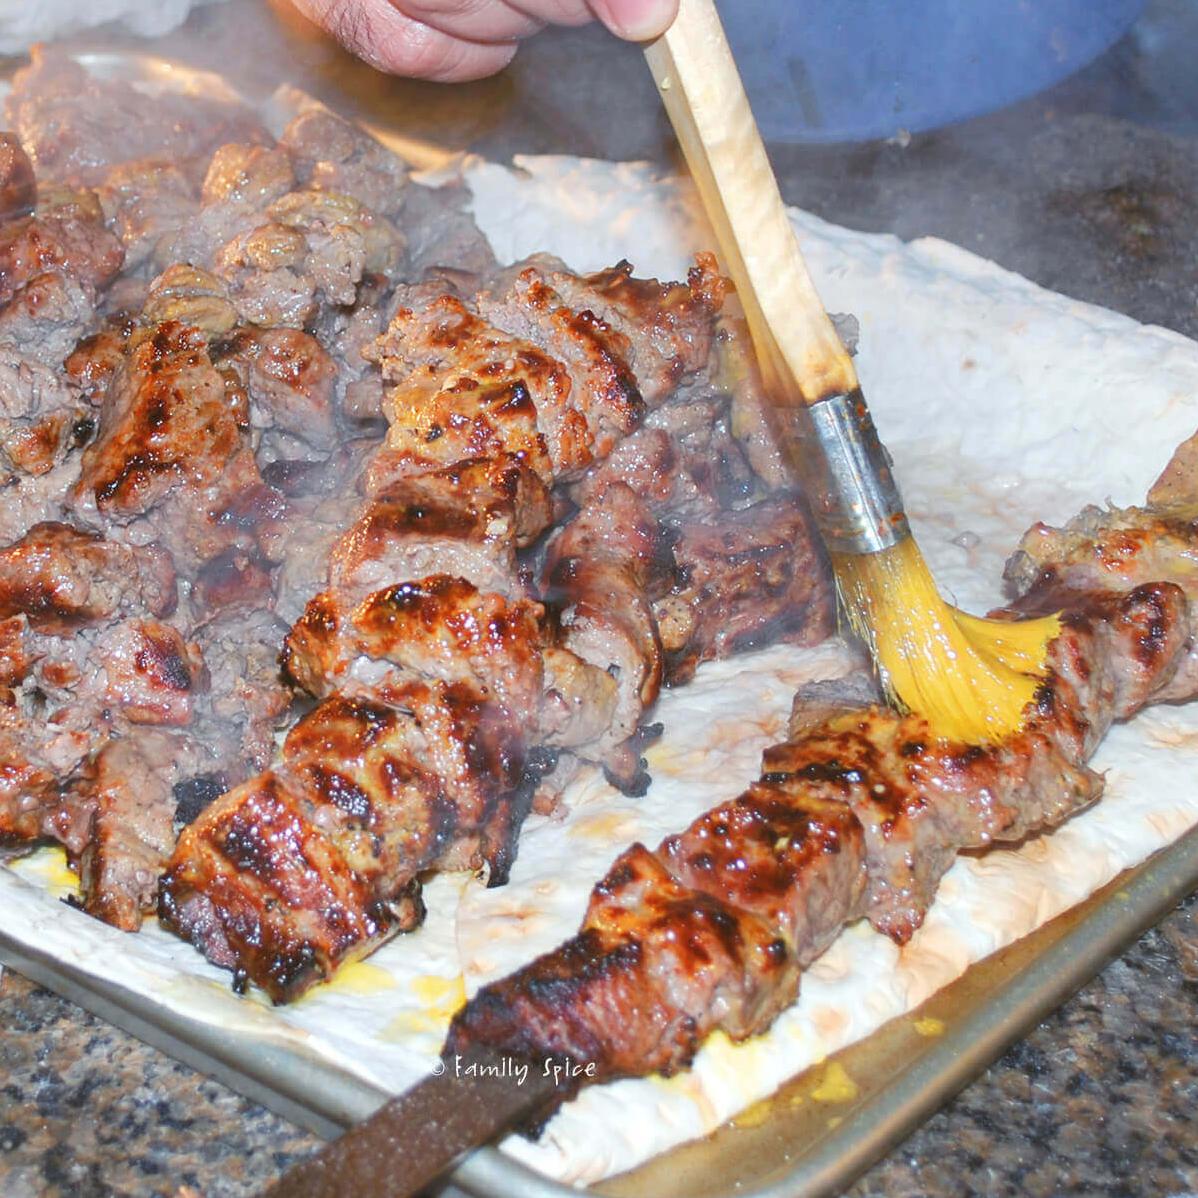  Sizzling hot skewers of Kabob Barg ready to be served!